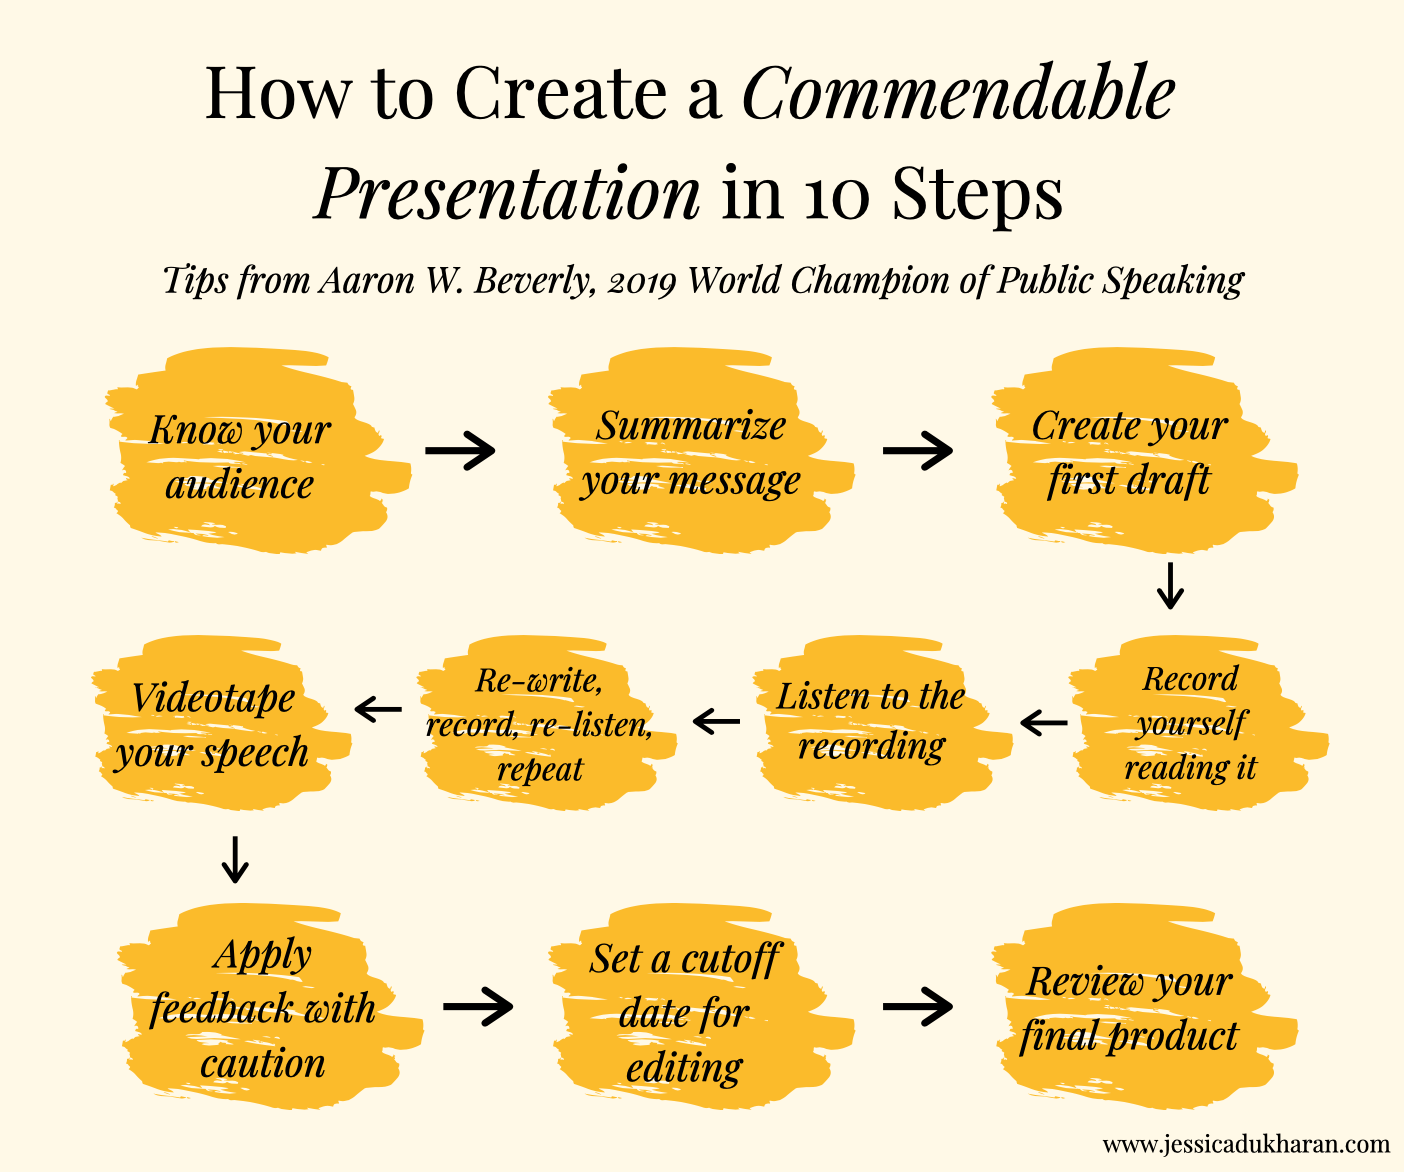 How to Create a Commendable Presentation in 10 Steps | Tips from Aaron W. Beverly, 2019 World Champion of Public Speaking